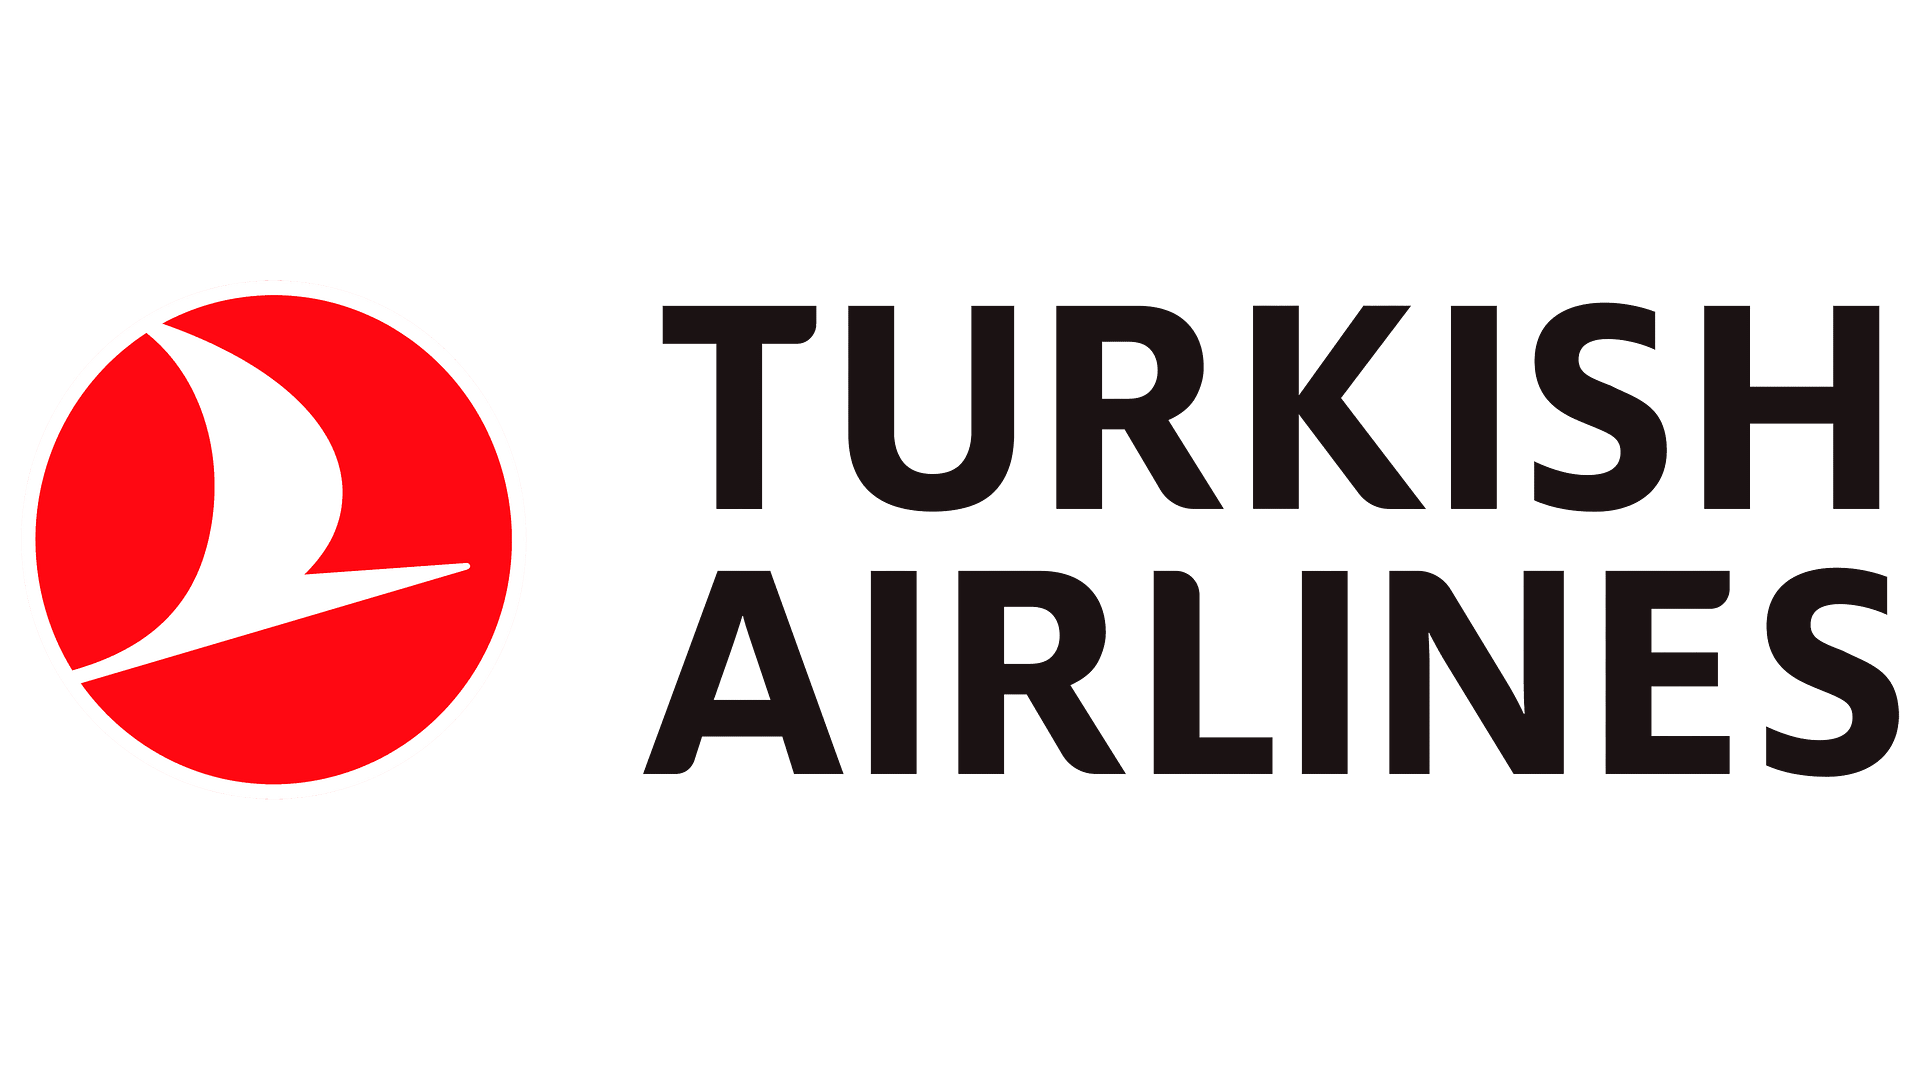 Turkish Airlines | Phone Number 1-800-874-8875